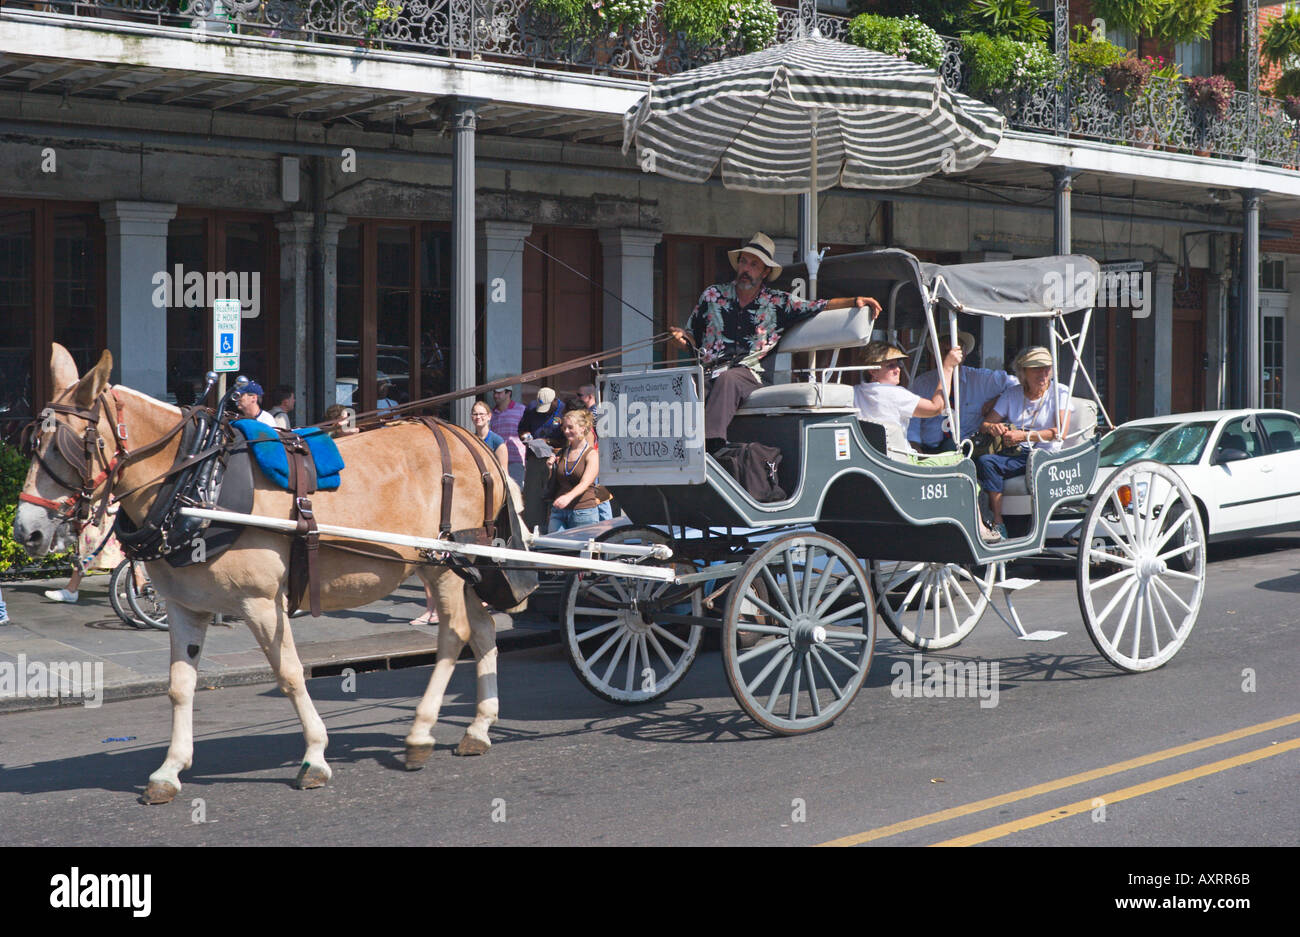 Visitors siteseeing in horse drawn carriage on Decatur Street in the French Quarter of New Orleans Louisana USA Stock Photo